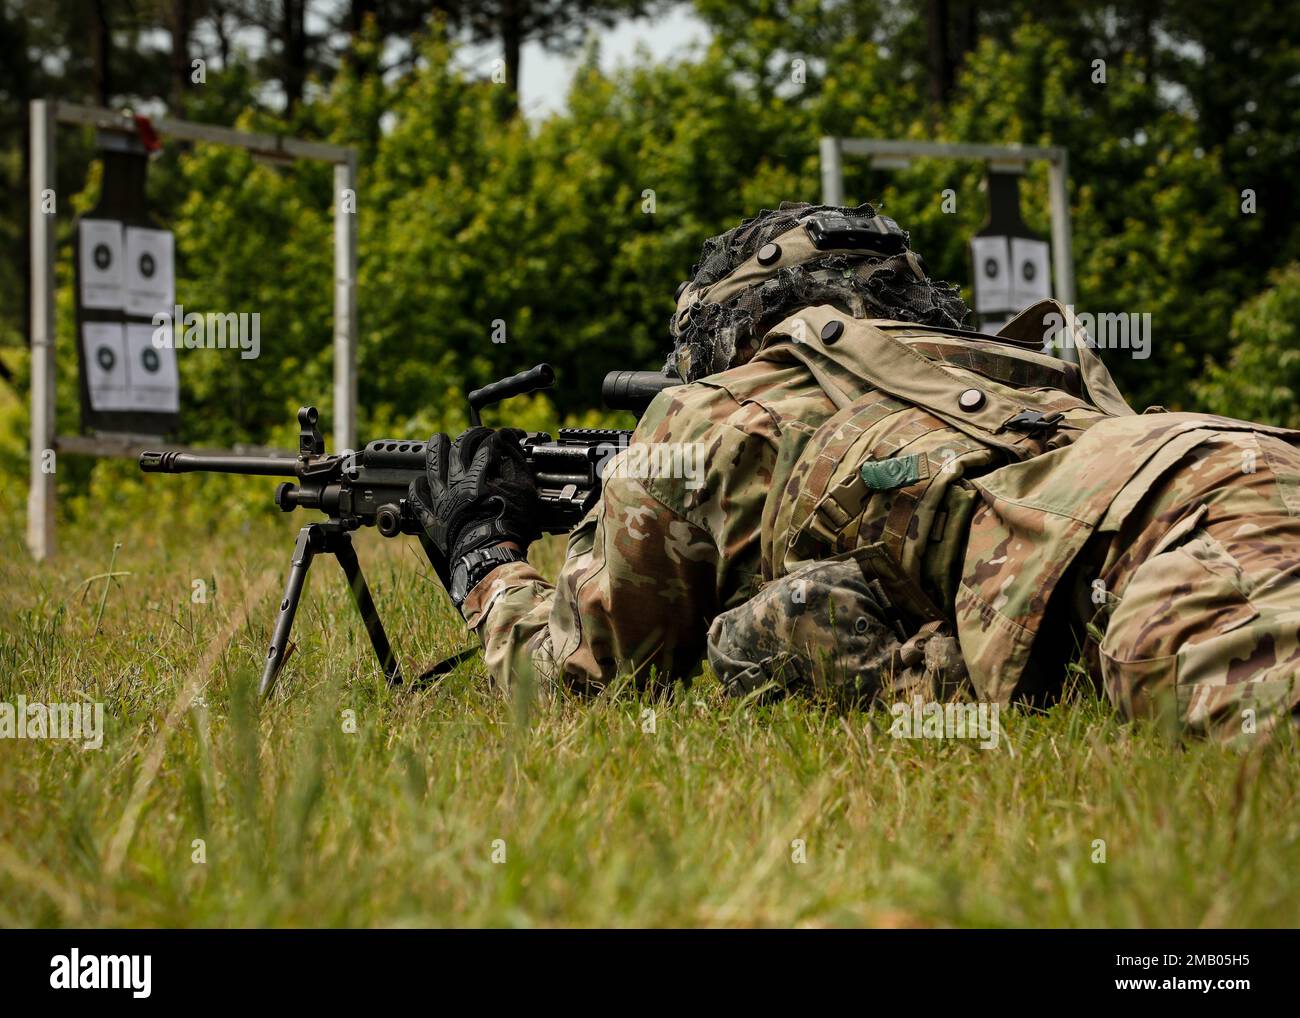 Arkansas National Guard Soldiers from the 39th Infantry Brigade Combat Team zero on their 249 Squad Automatic Weapon (SAW) June 6, 2022 at Fort Chaffee, Ark. The SAW is an American adaption of the Belgian FN Minimi. It was introducted in 1984 upon being selected as the most effective out of a line of candidate weapons. Stock Photo